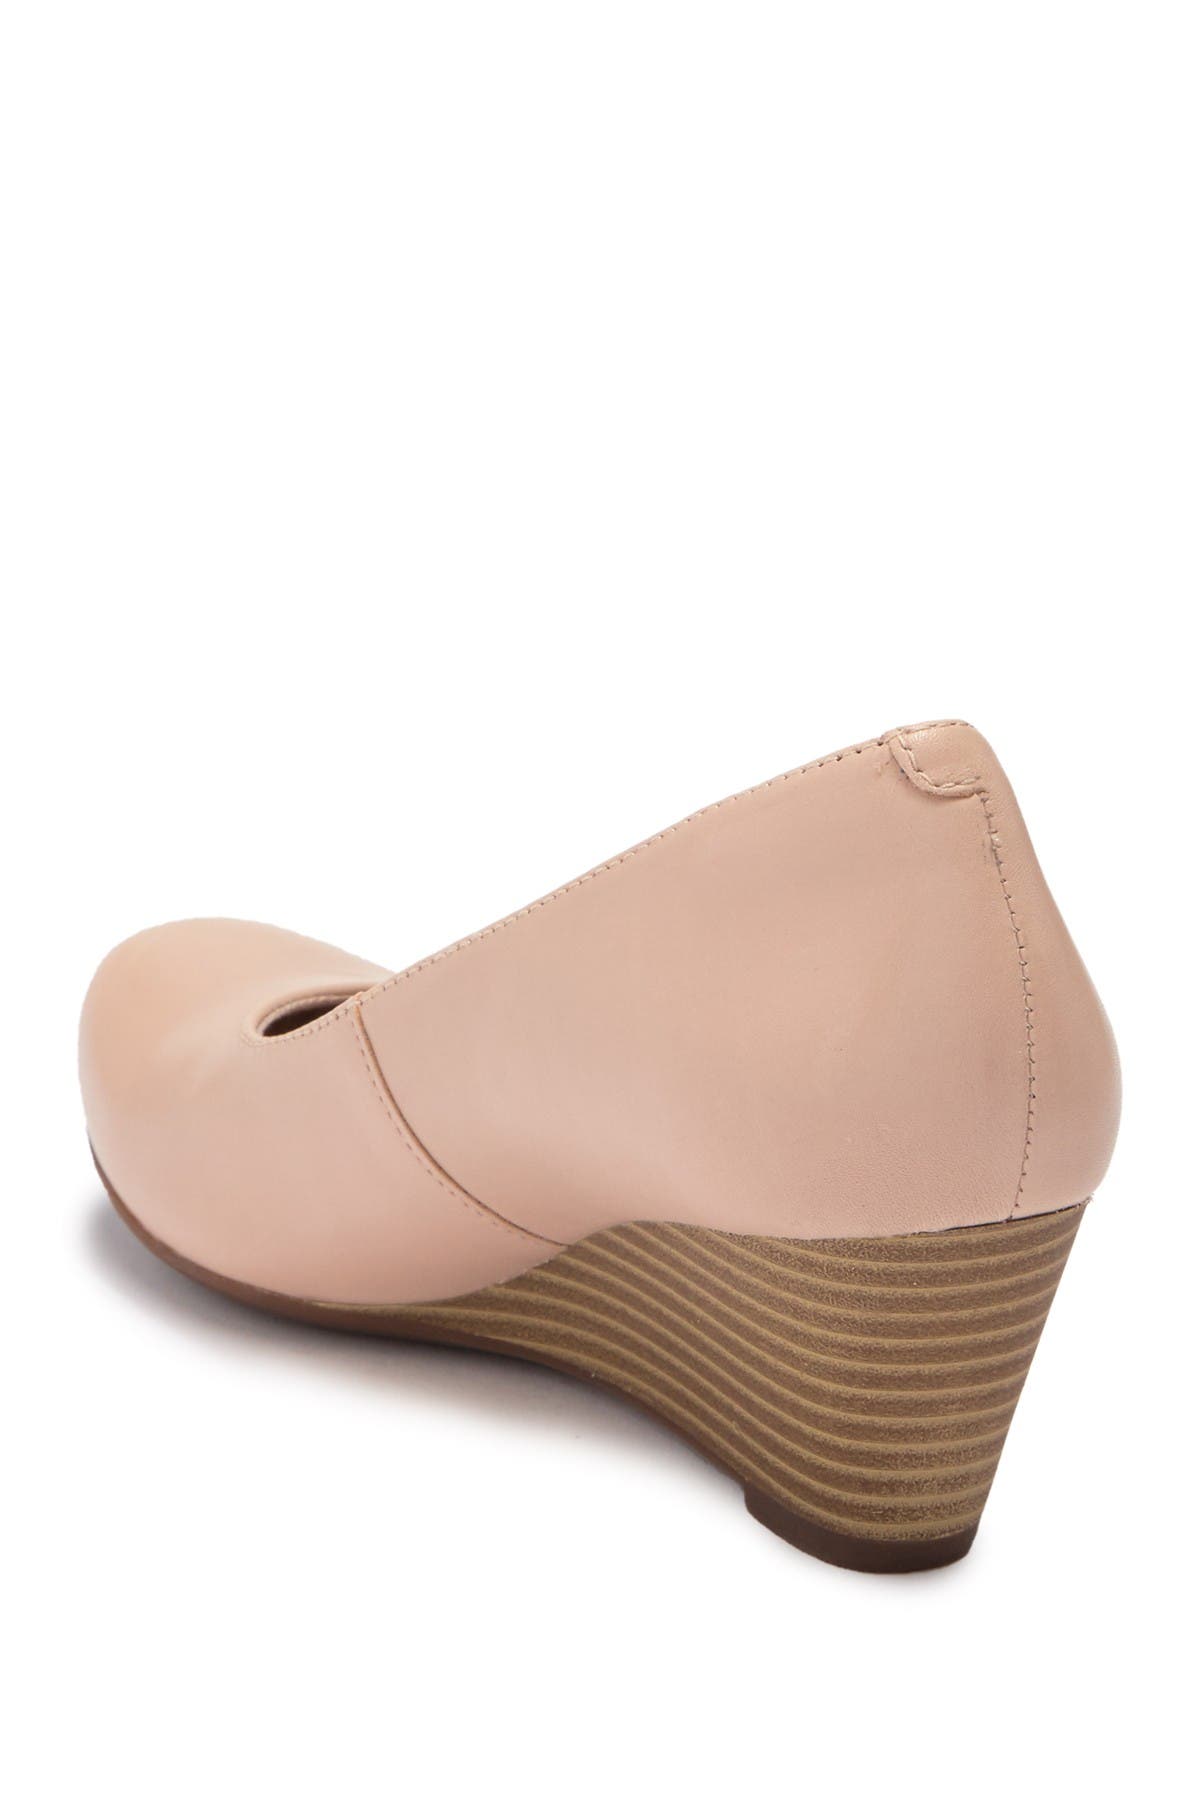 Clarks | Flores Petra Leather Wedge 